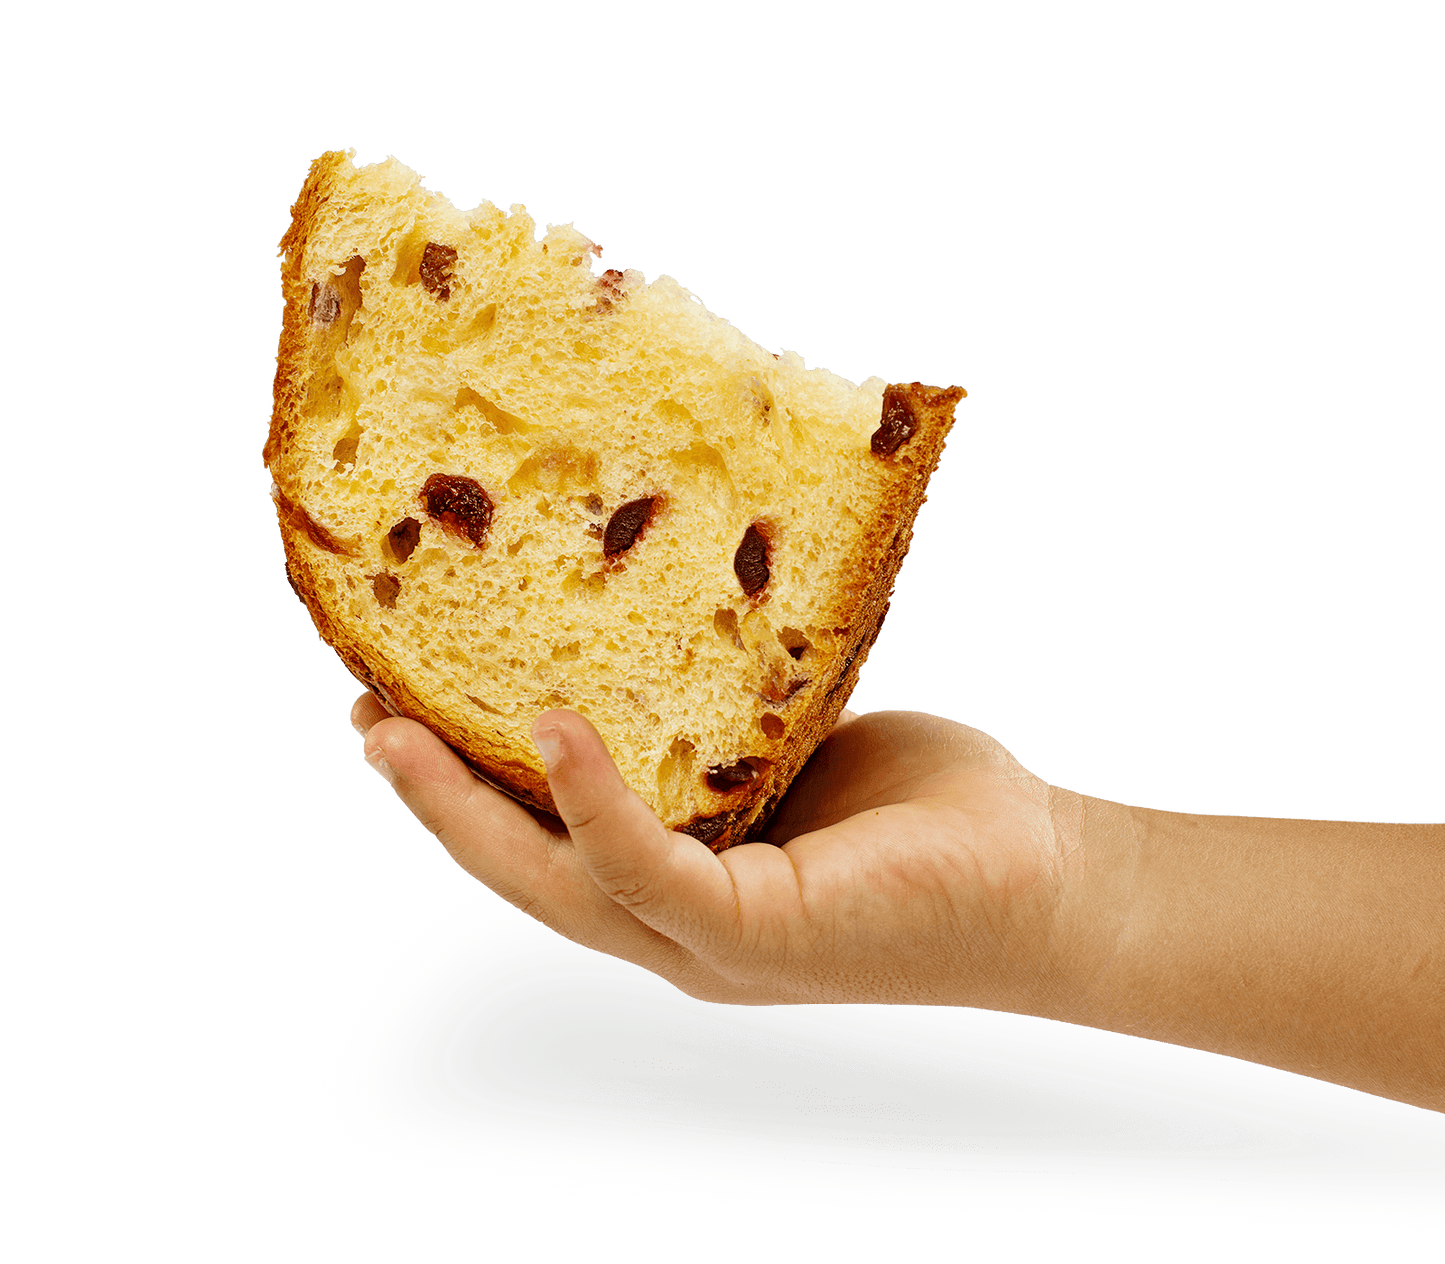 Loison Panettone Fico di Calabria - Calabrian Fig Panettone with raisins and figs from Calabria